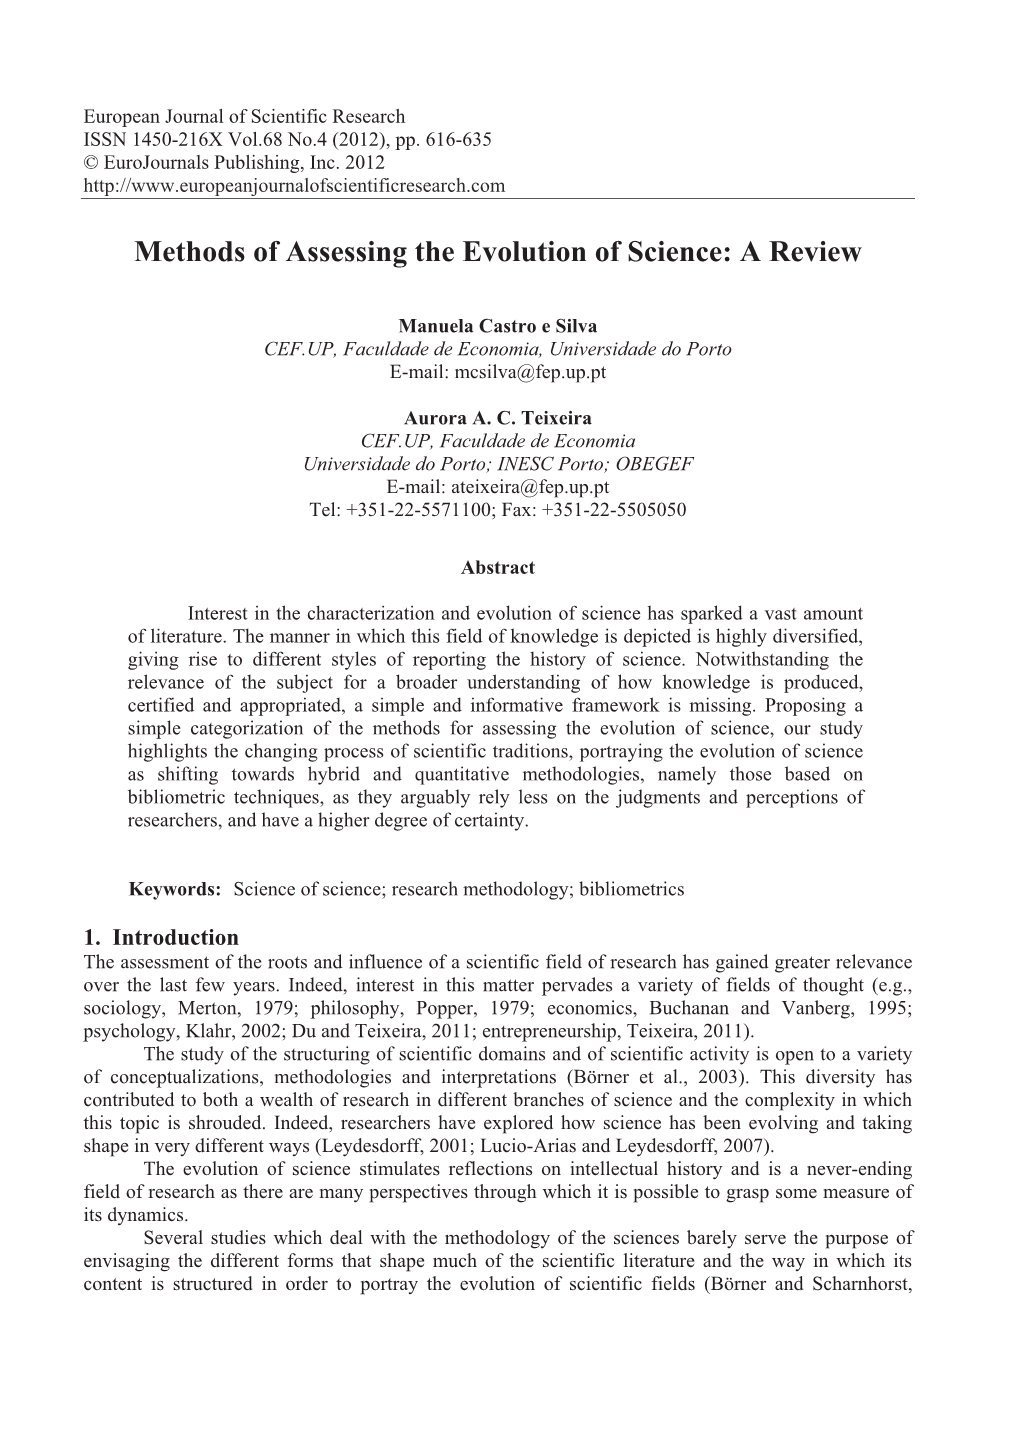 Methods of Assessing the Evolution of Science: a Review